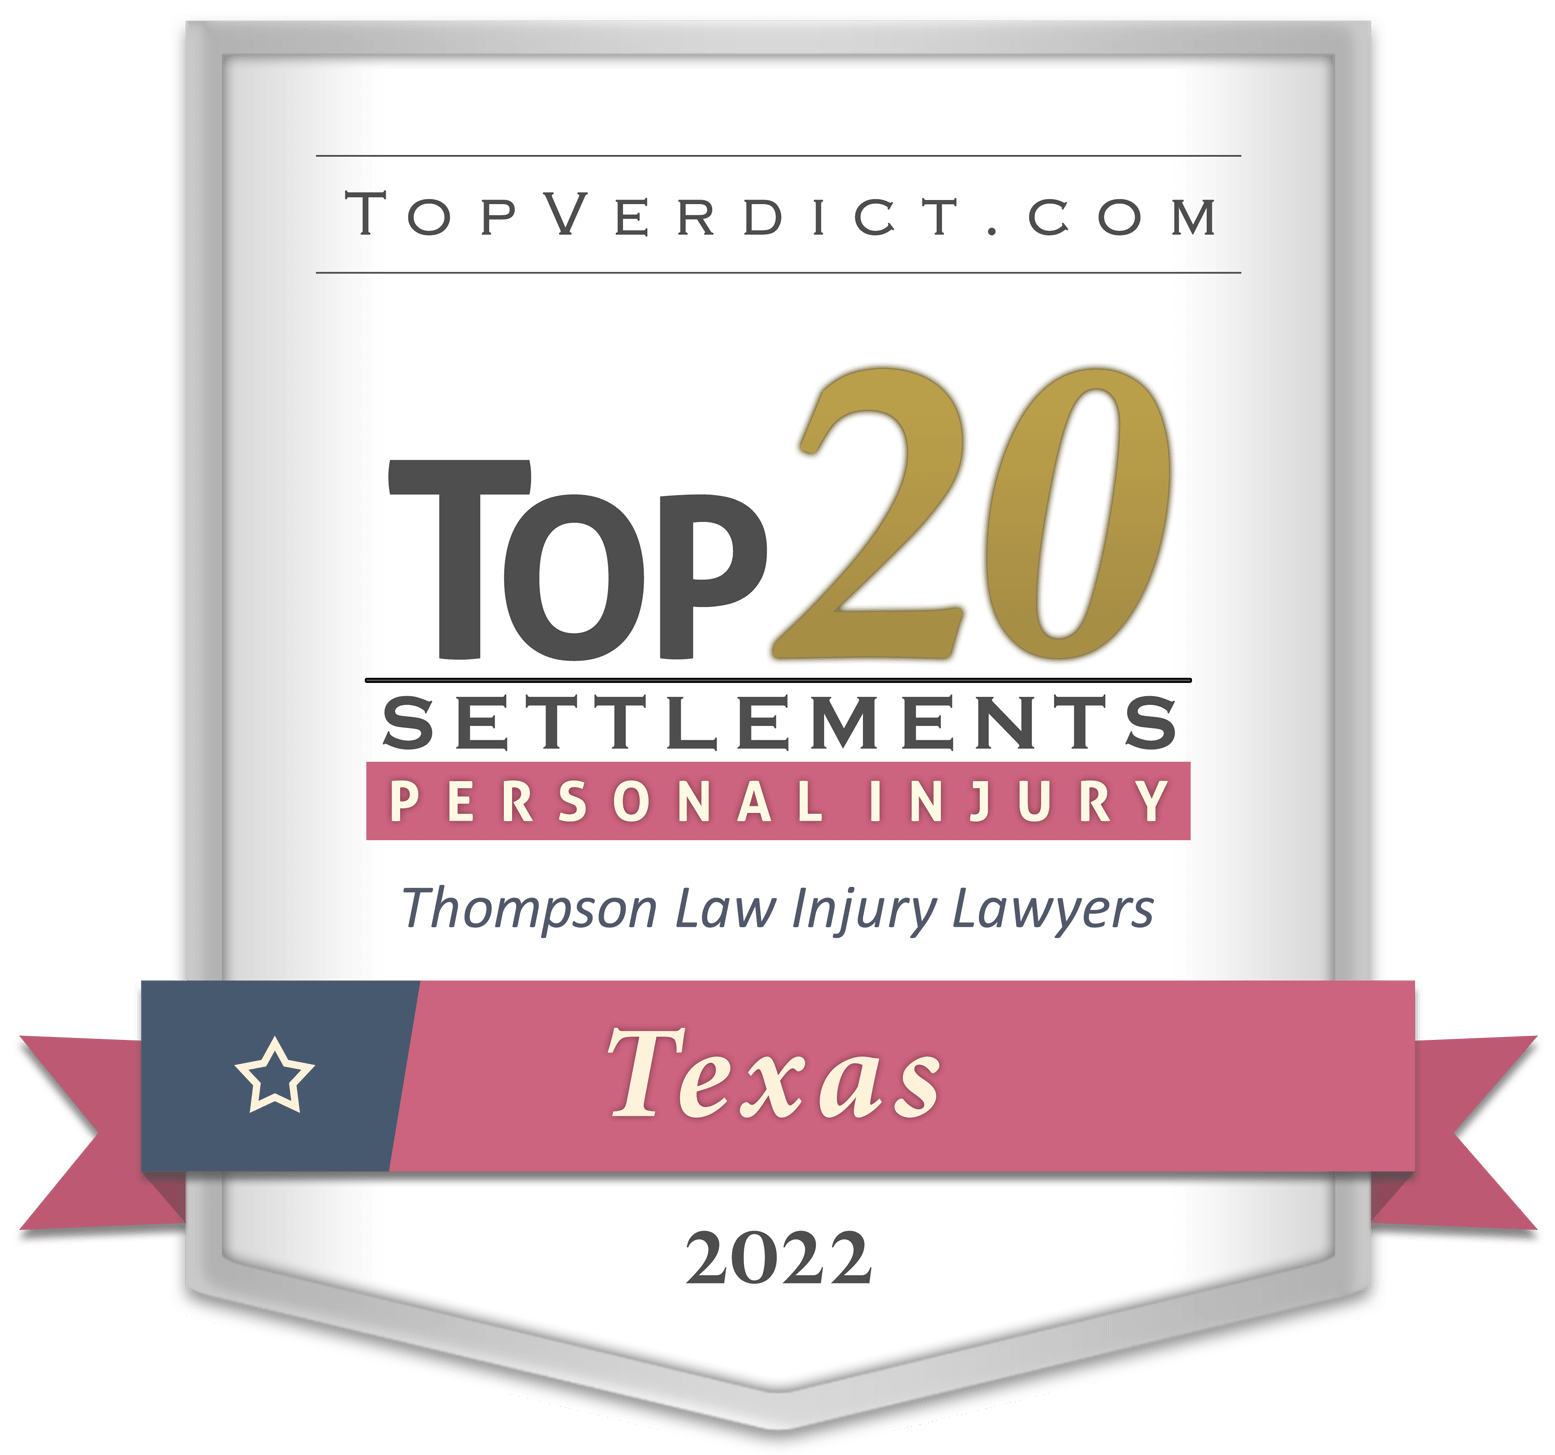 TopVerdict Top 20 personal injury settlements in Texas 2022 badge - Pearland Personal Injury Law Firm